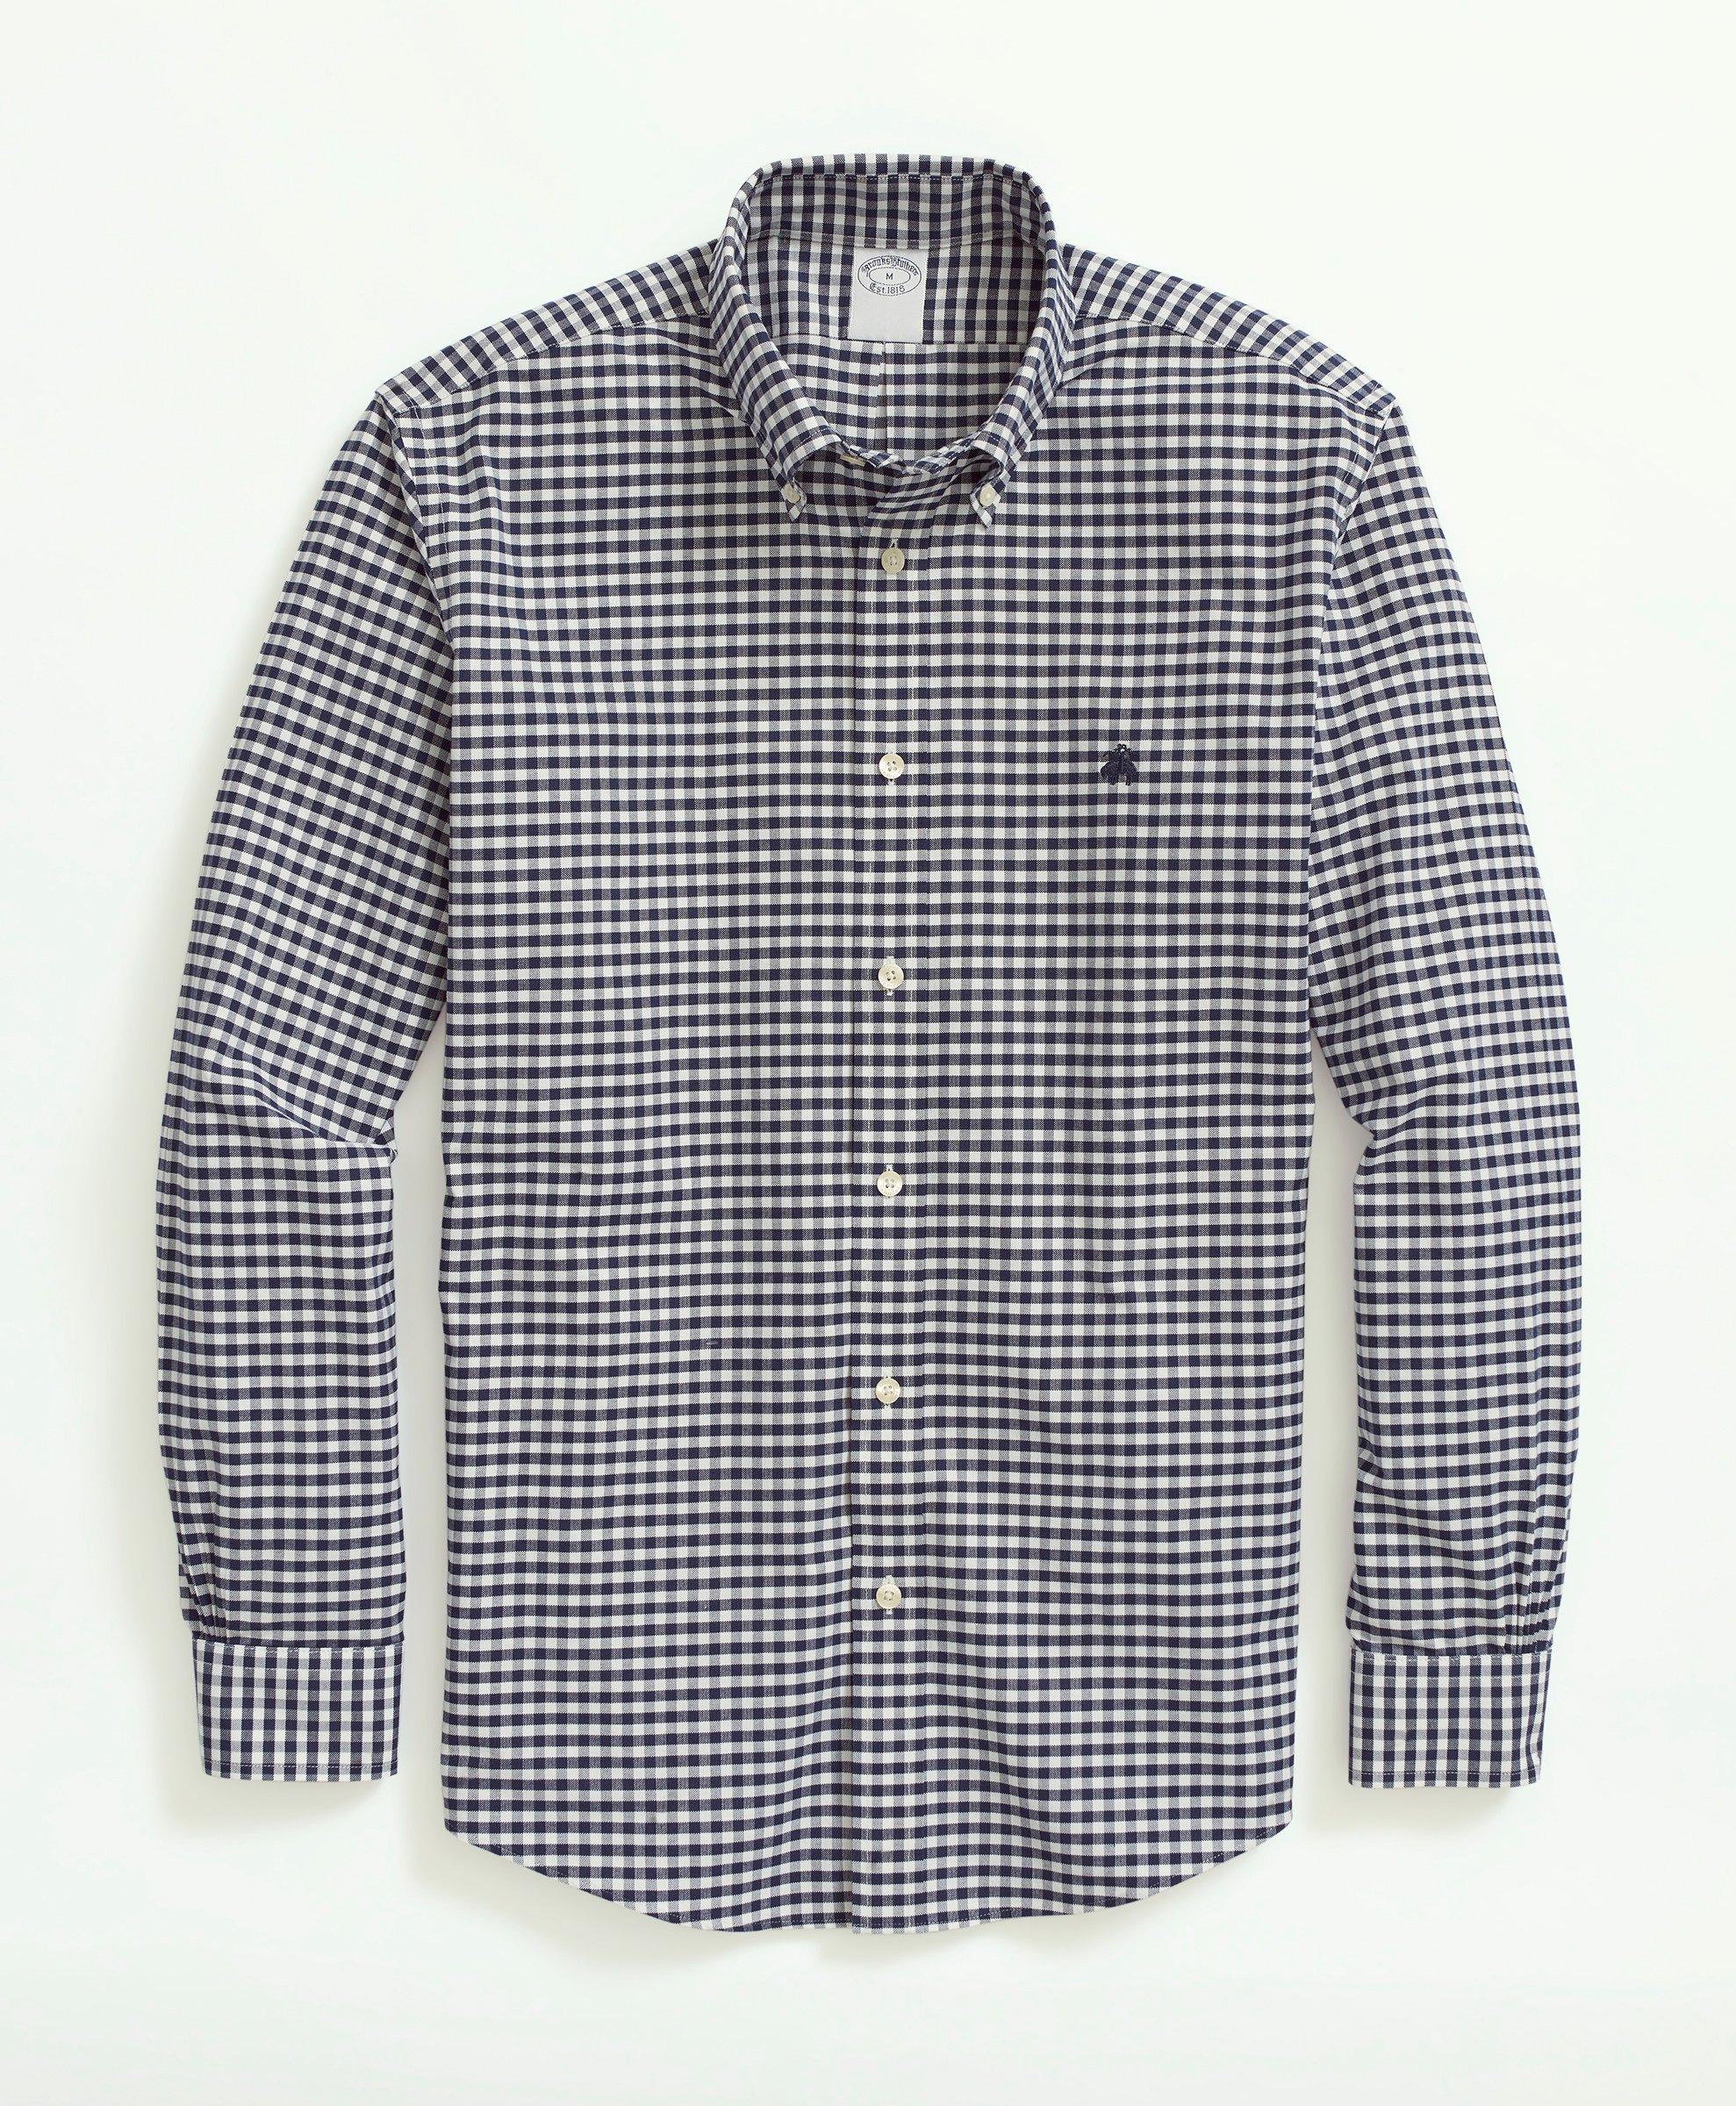 Brooks Brothers Stretch Non-iron Oxford Button-down Collar, Gingham Sport Shirt | Navy | Size 2xl